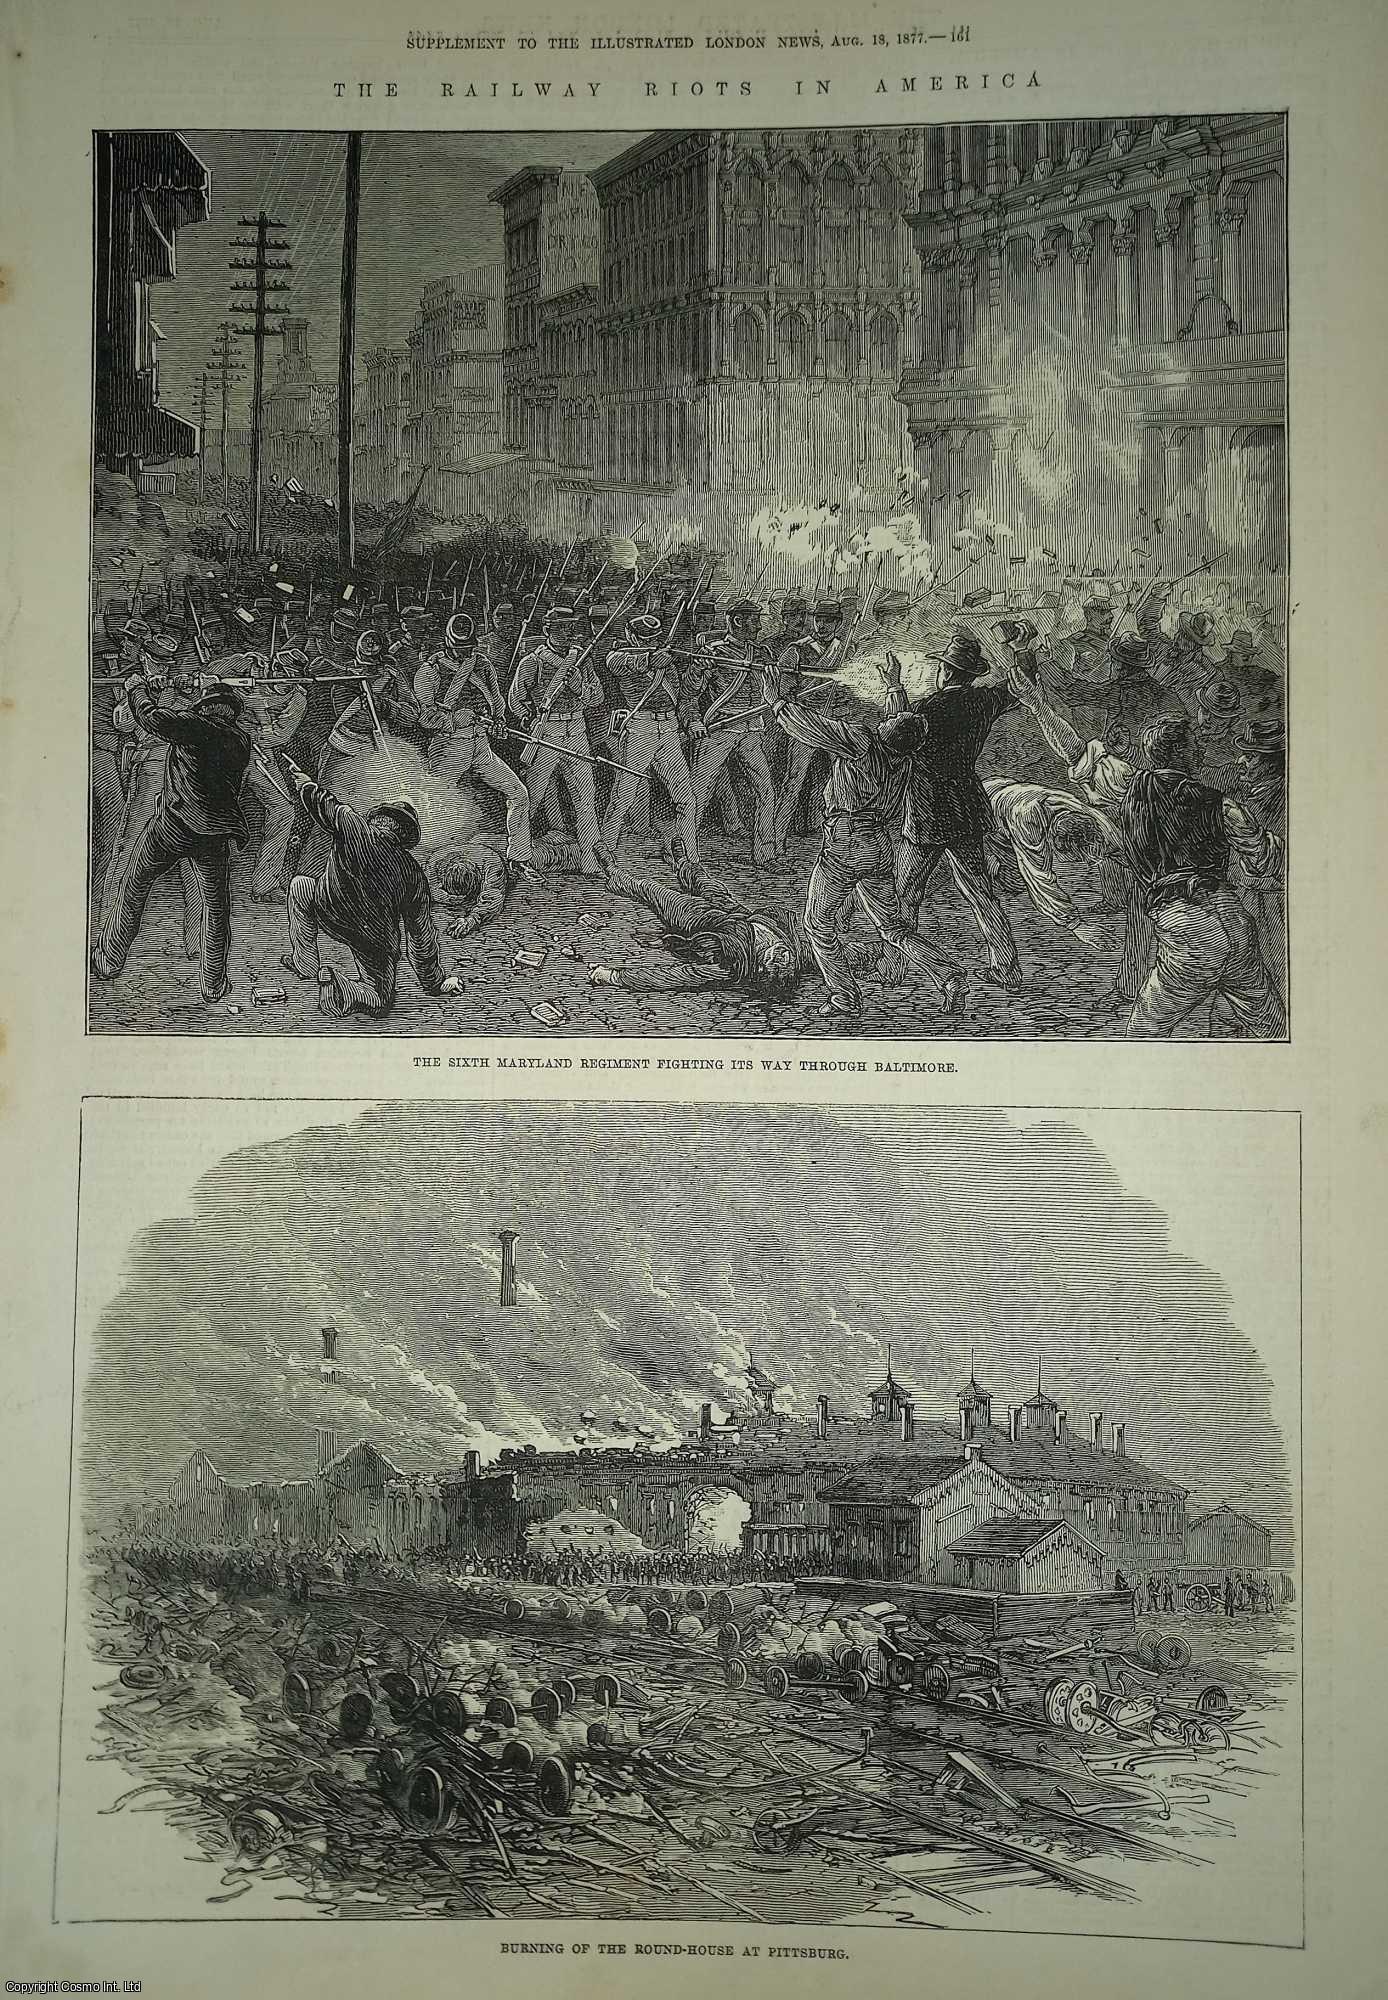 GREAT RAILROAD STRIKE OF 1877 - The Railway Riots in Baltimore and Pittsburg. Two woodcut engravings. An original print from the Illustrated London News, 1877.